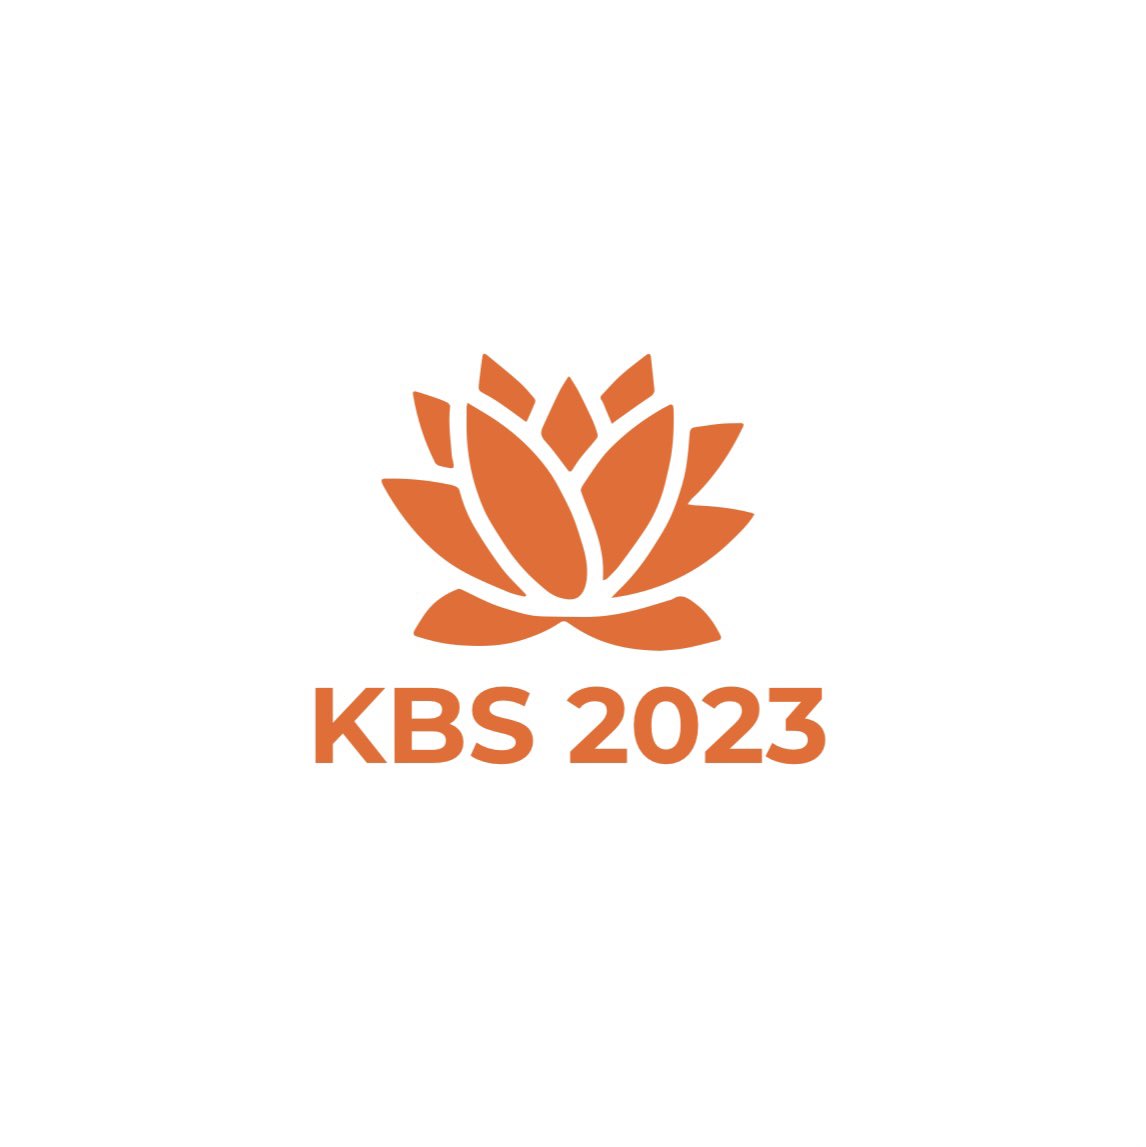 🎉 The #KBSConf 2023 in Johannesburg has come to a close! 🌍 Thank you to all the amazing attendees who made this event unforgettable. ✨ Wishing you all a safe journey back home and looking forward to seeing you again next year! 🙌